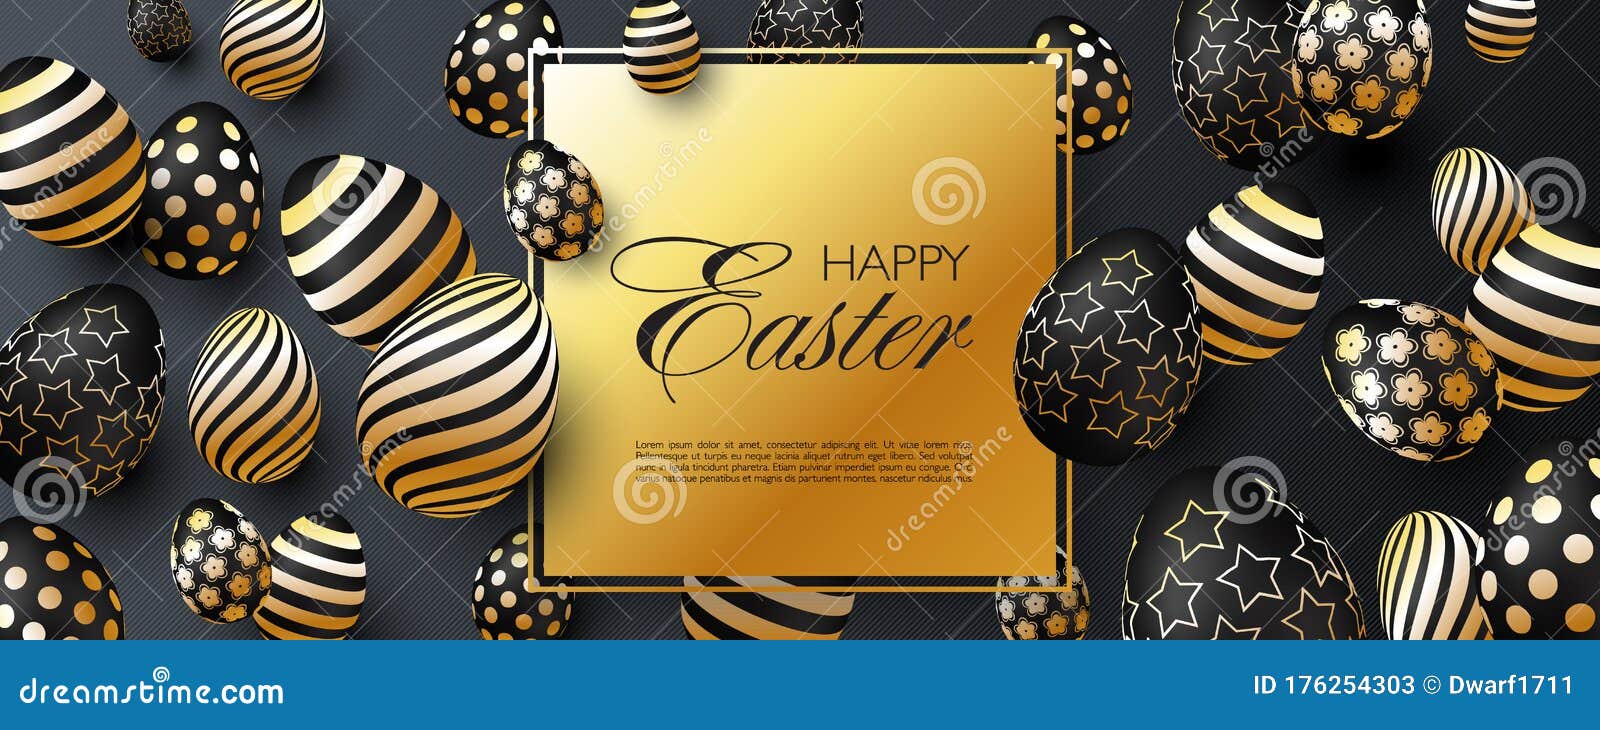 Luxury Happy Easter website header or banner template with realistic 3D black golden eggs on black striped background 